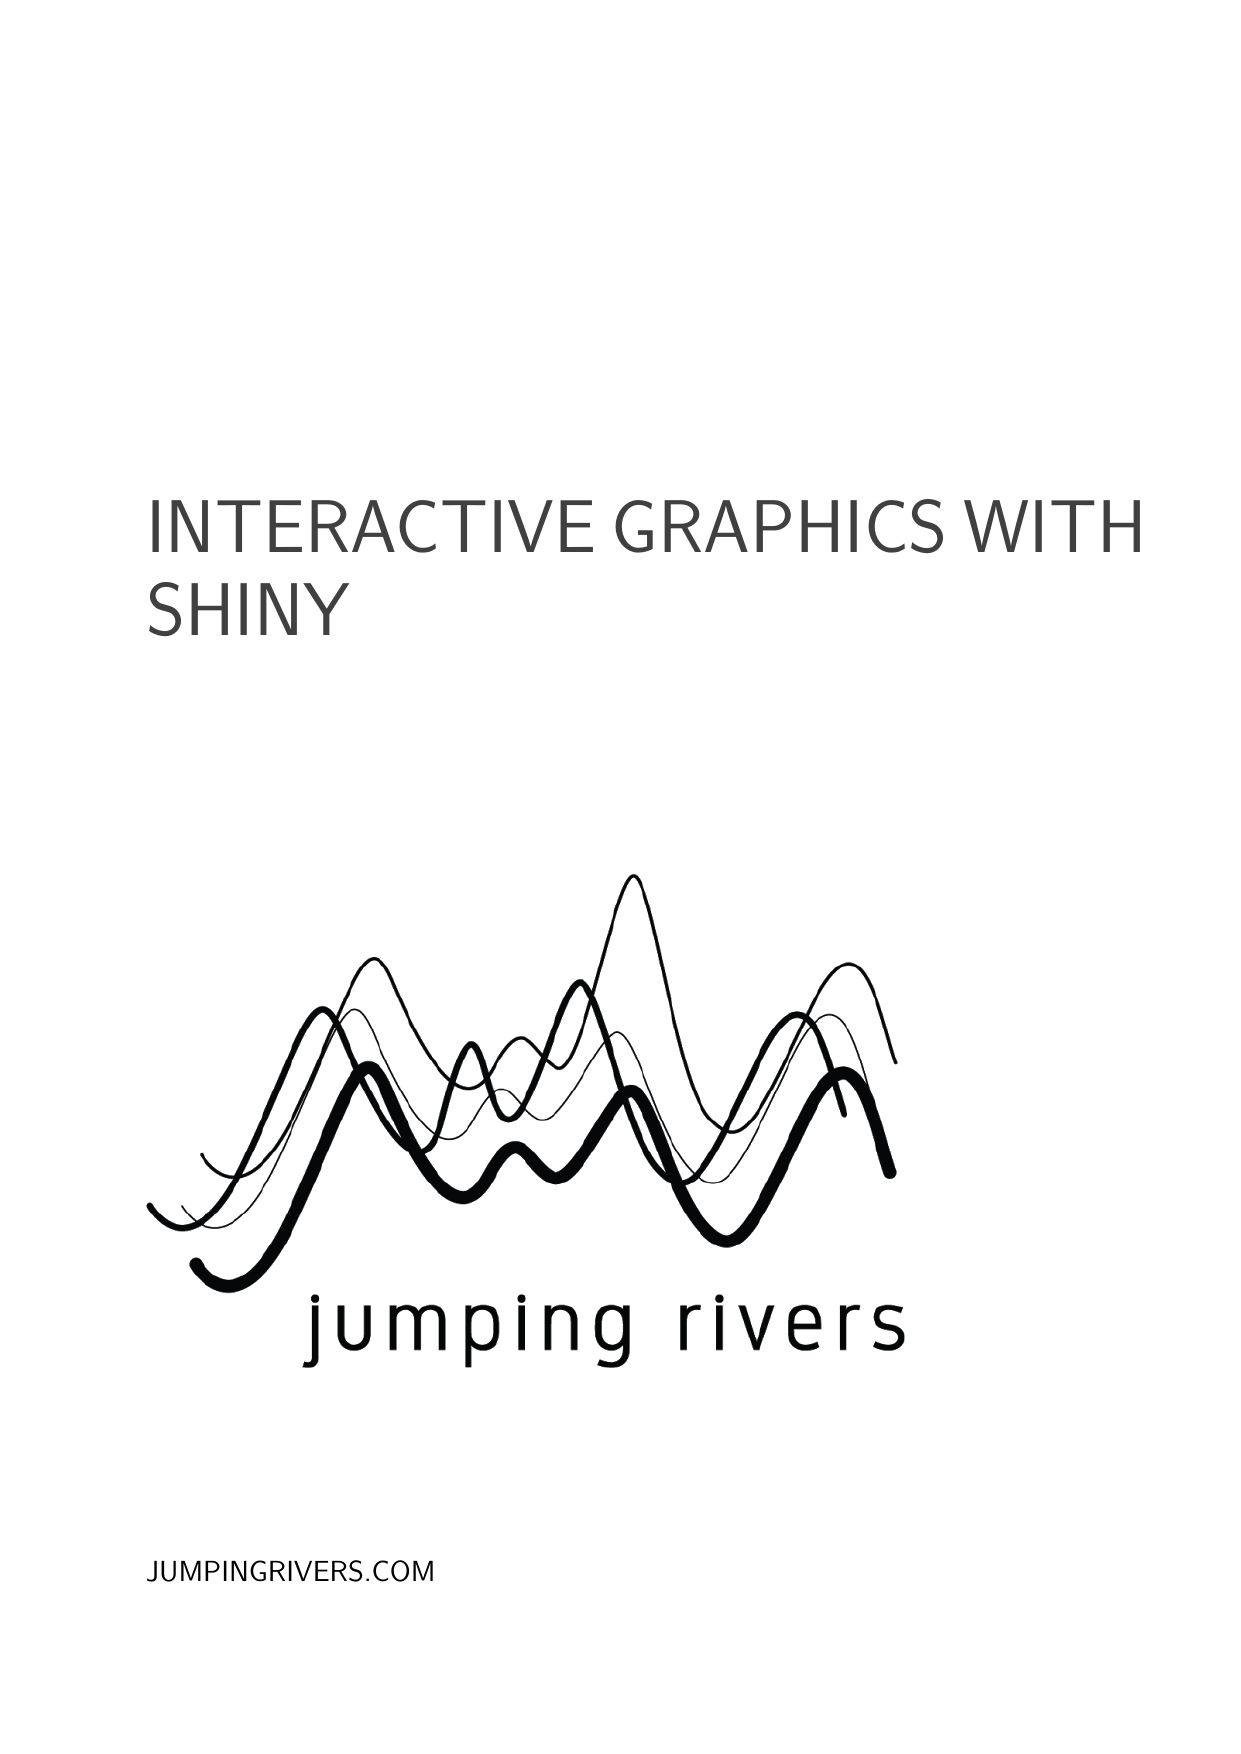 Example course material for 'Introduction to R Shiny